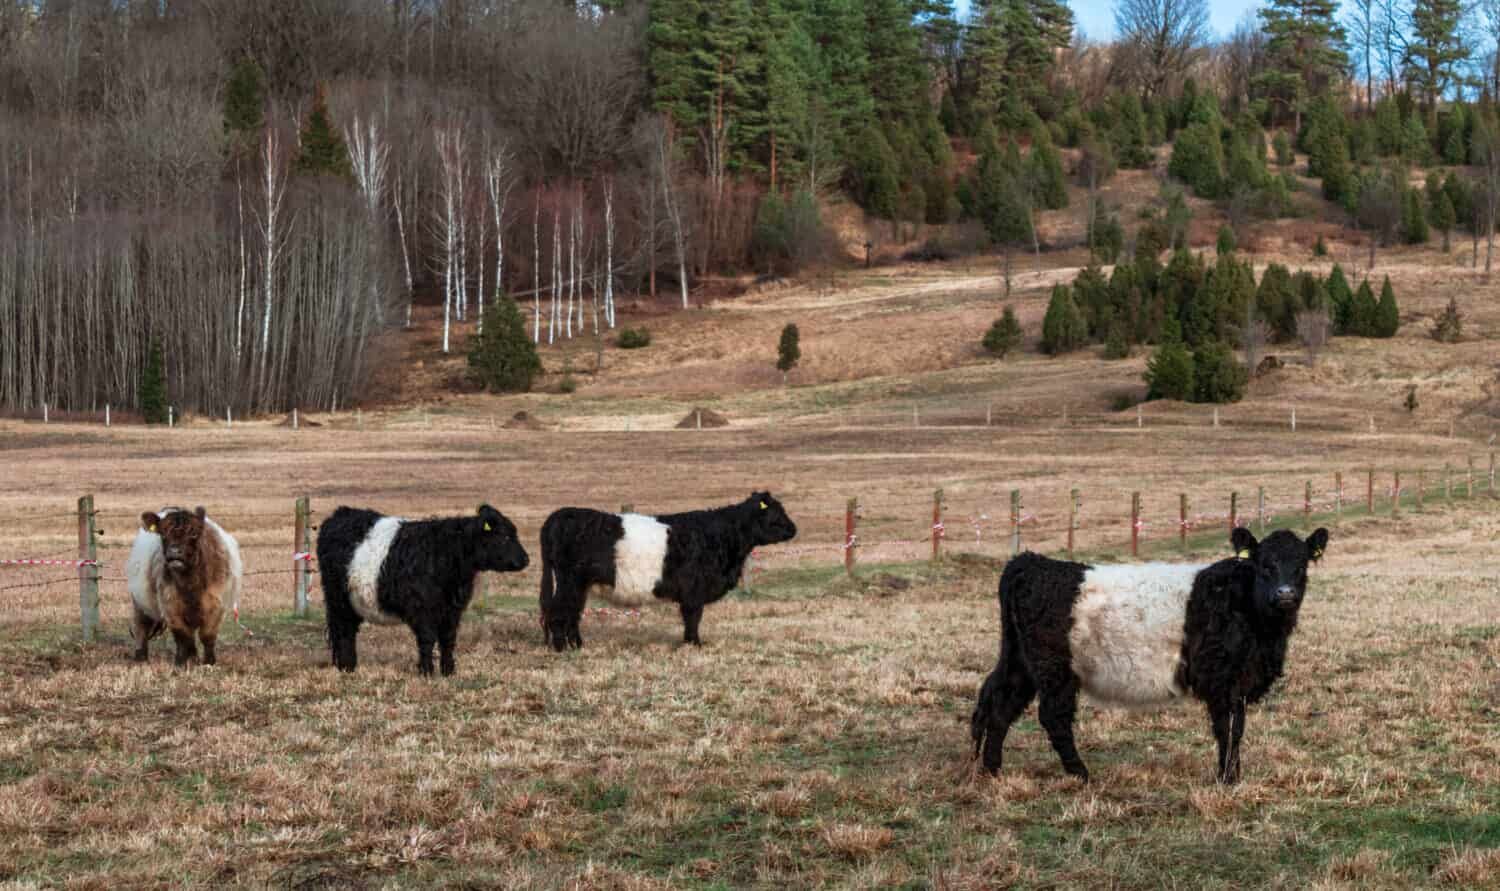 Belted Galloway cows aren’t the most expensive but they adapt well to their surroundings.